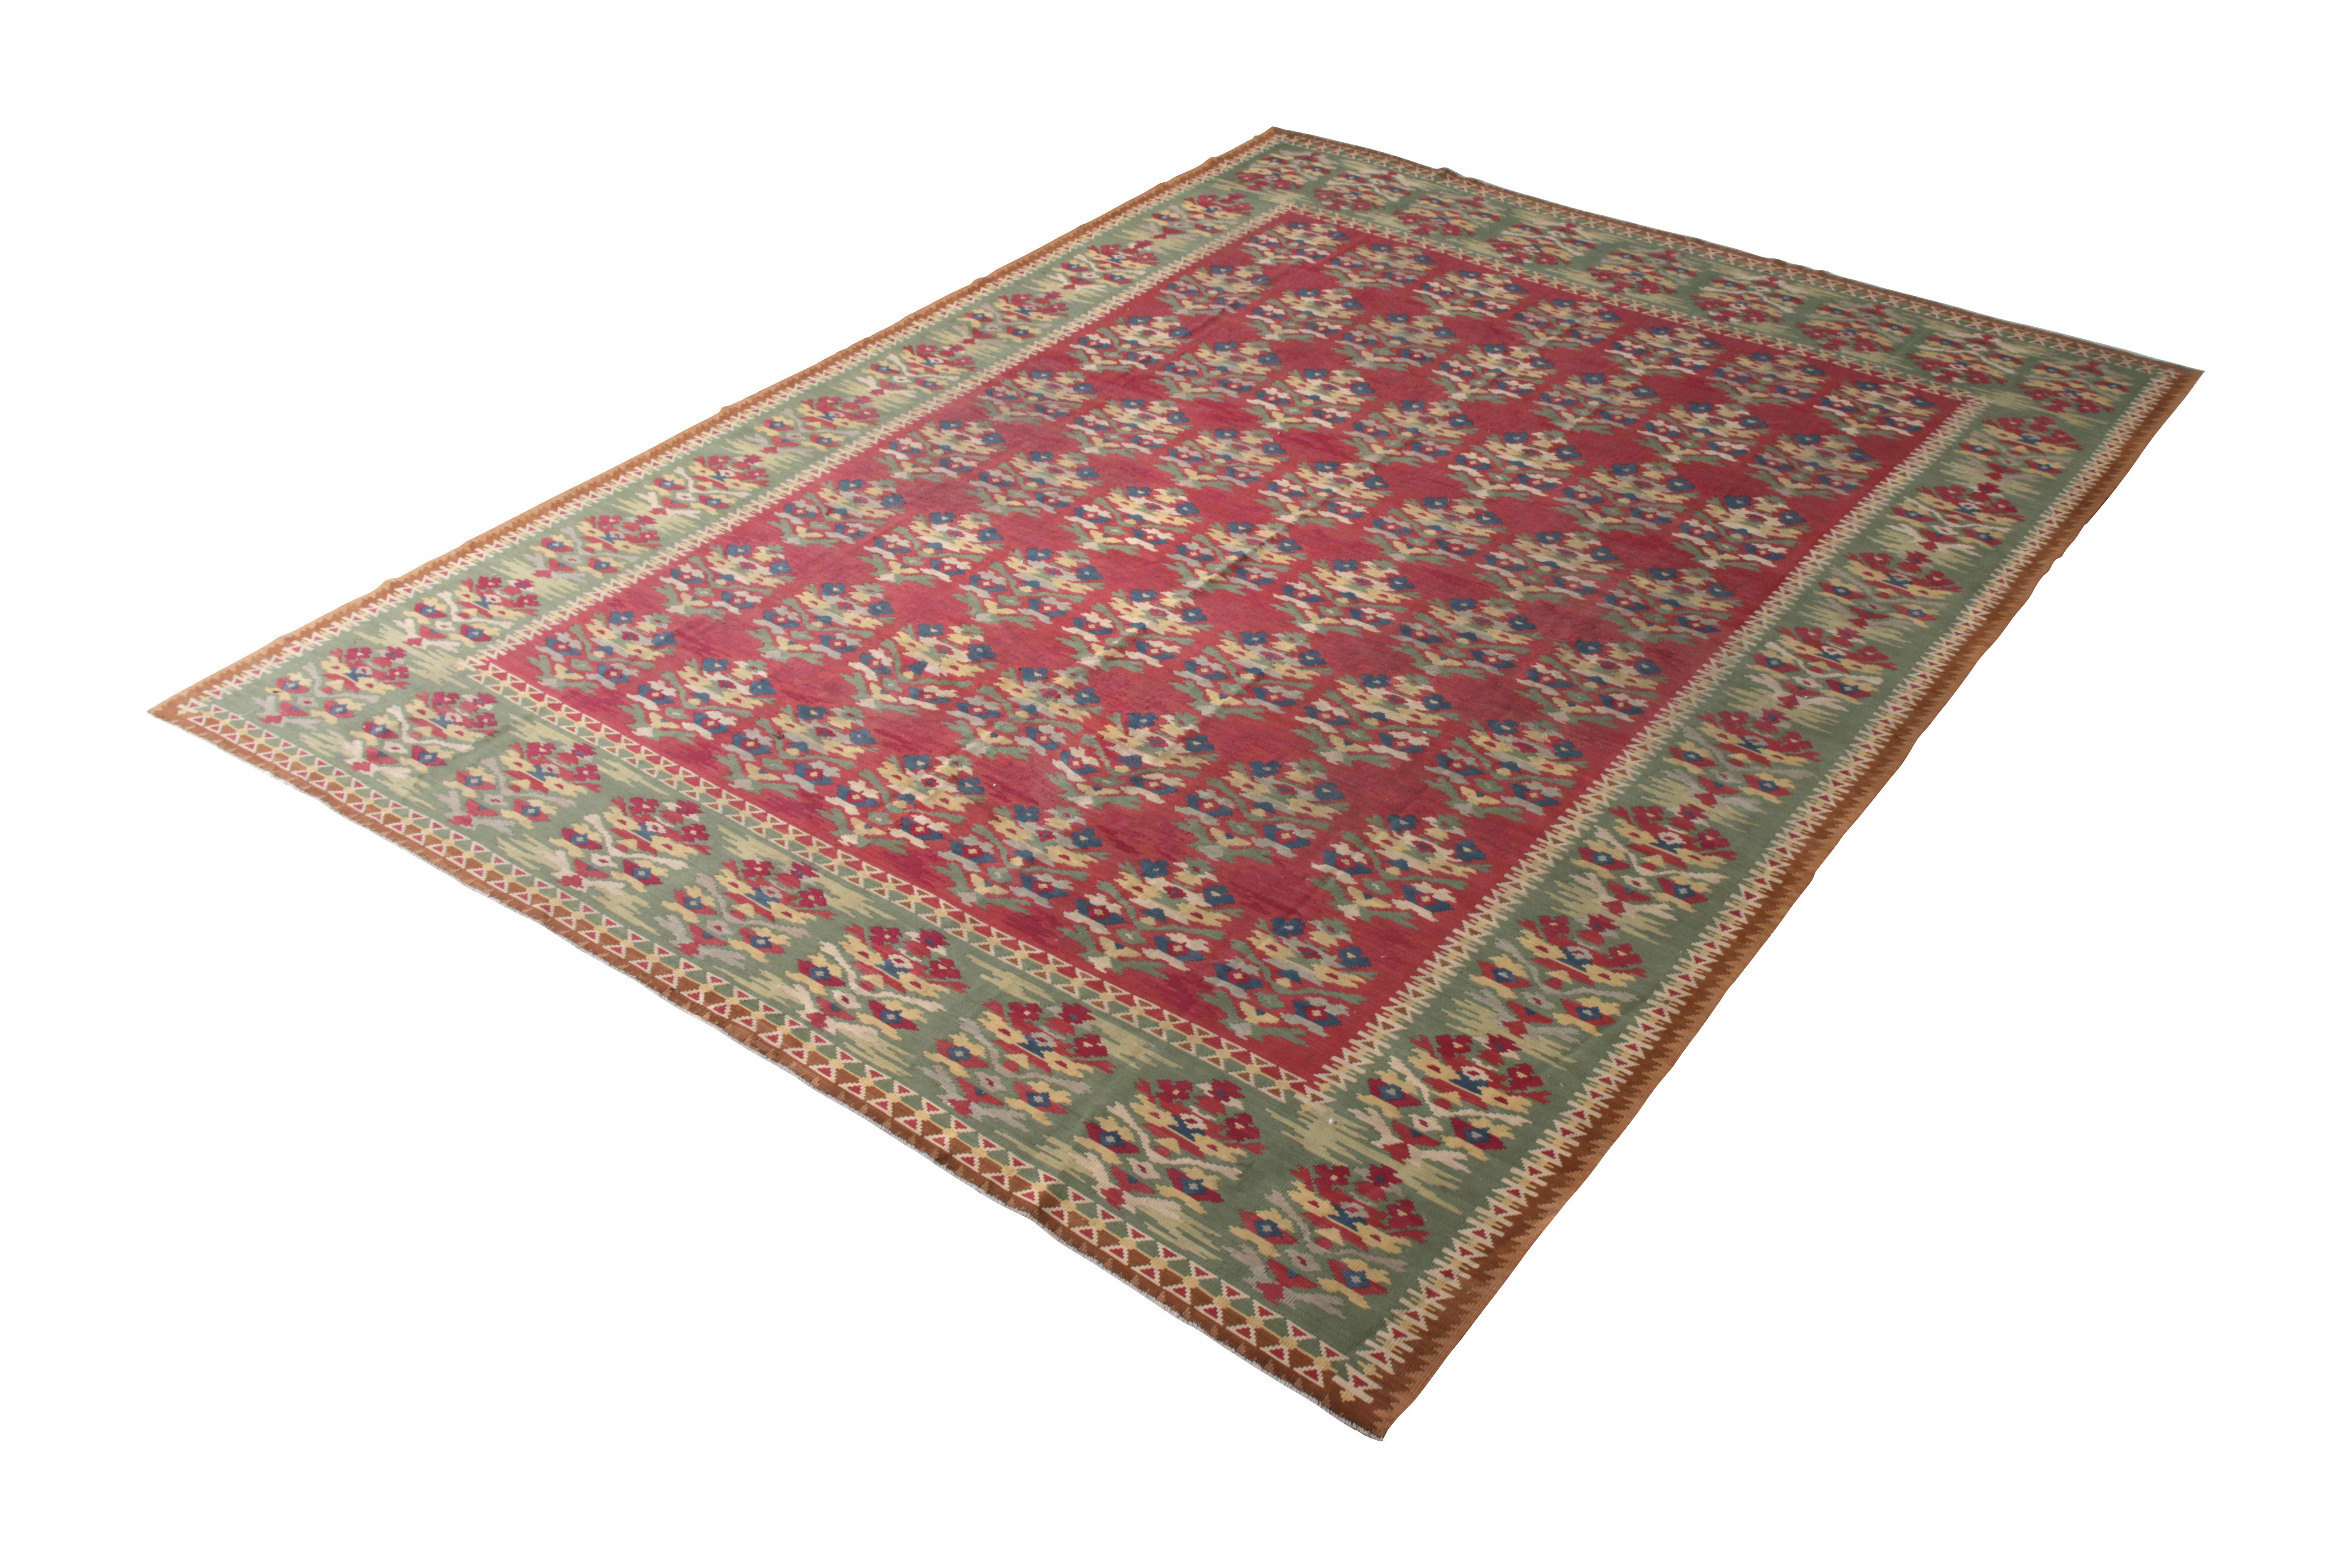 Handwoven in a wool flat-weave originating from Turkey circa 1950-1960, this vintage Kilim rug connotes a mid-century Turkish Kilim rug design in a transitional play of Classic geometry and progressive colors—a sought-after red and green playing